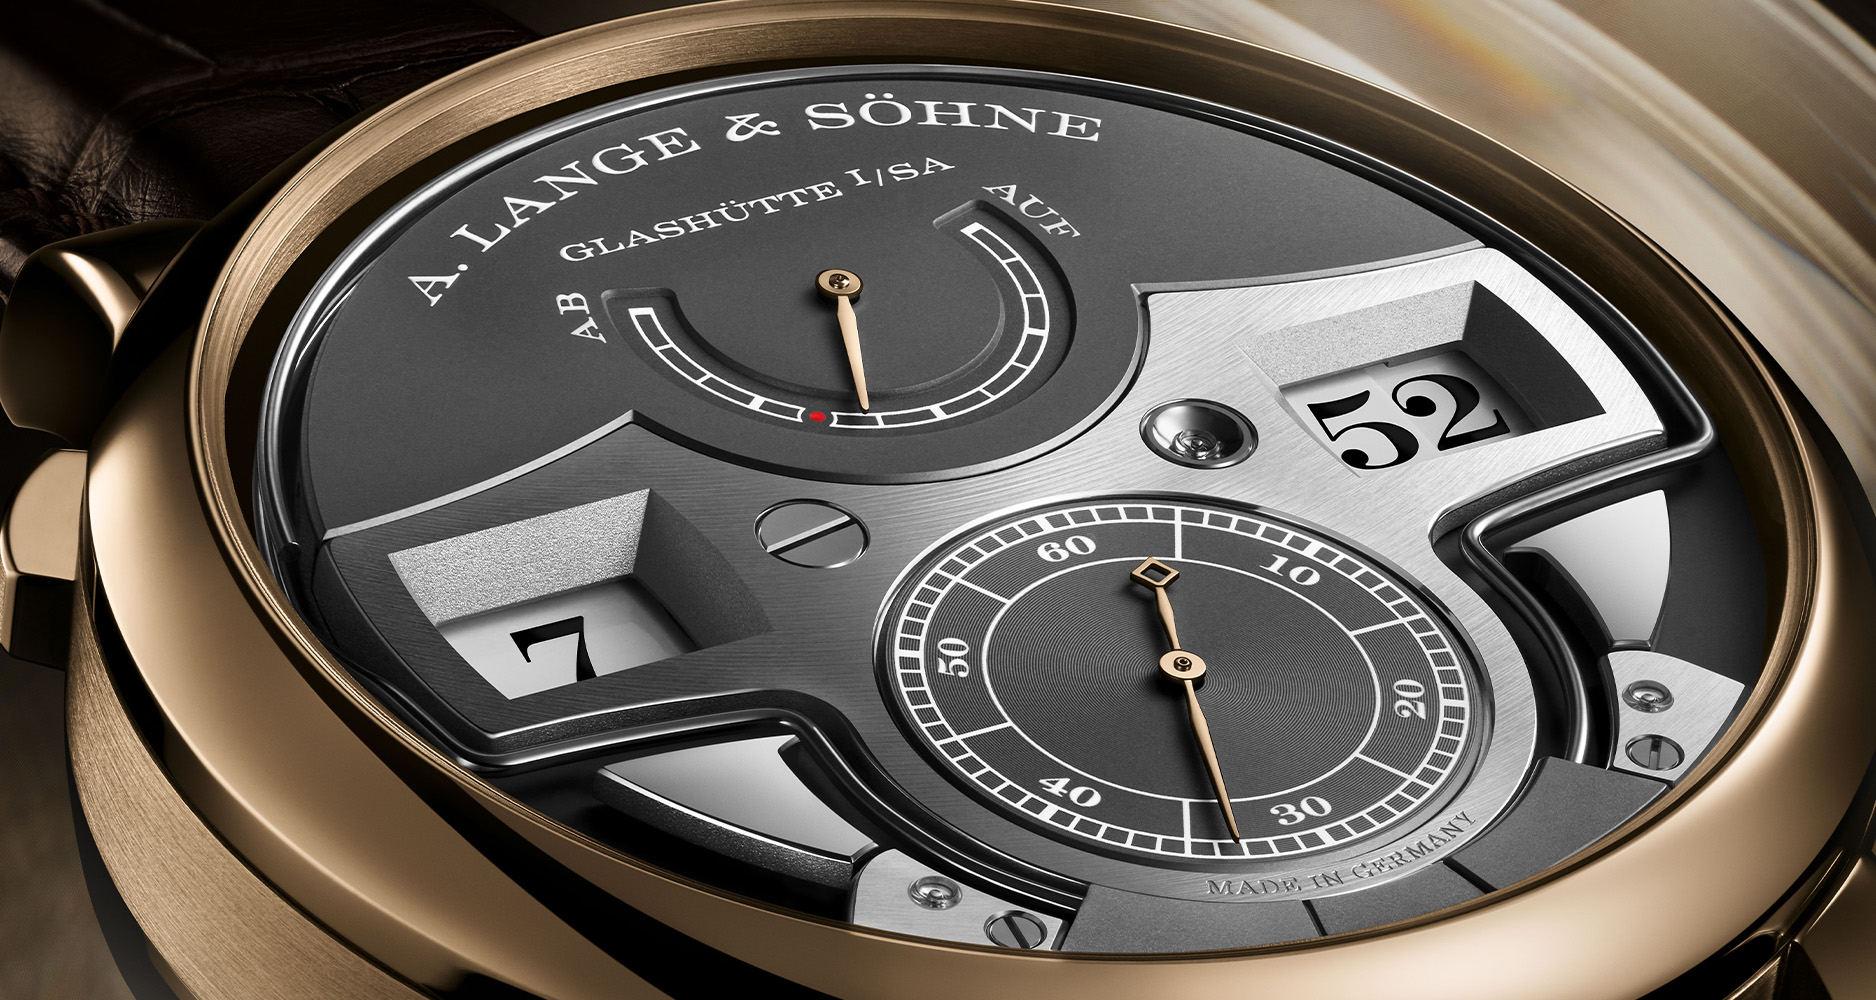 A pusher at 10 o'clock operates the minute repeater on the A. Lange & Söhne Zeitwerk Minute Repeater Honeygold.